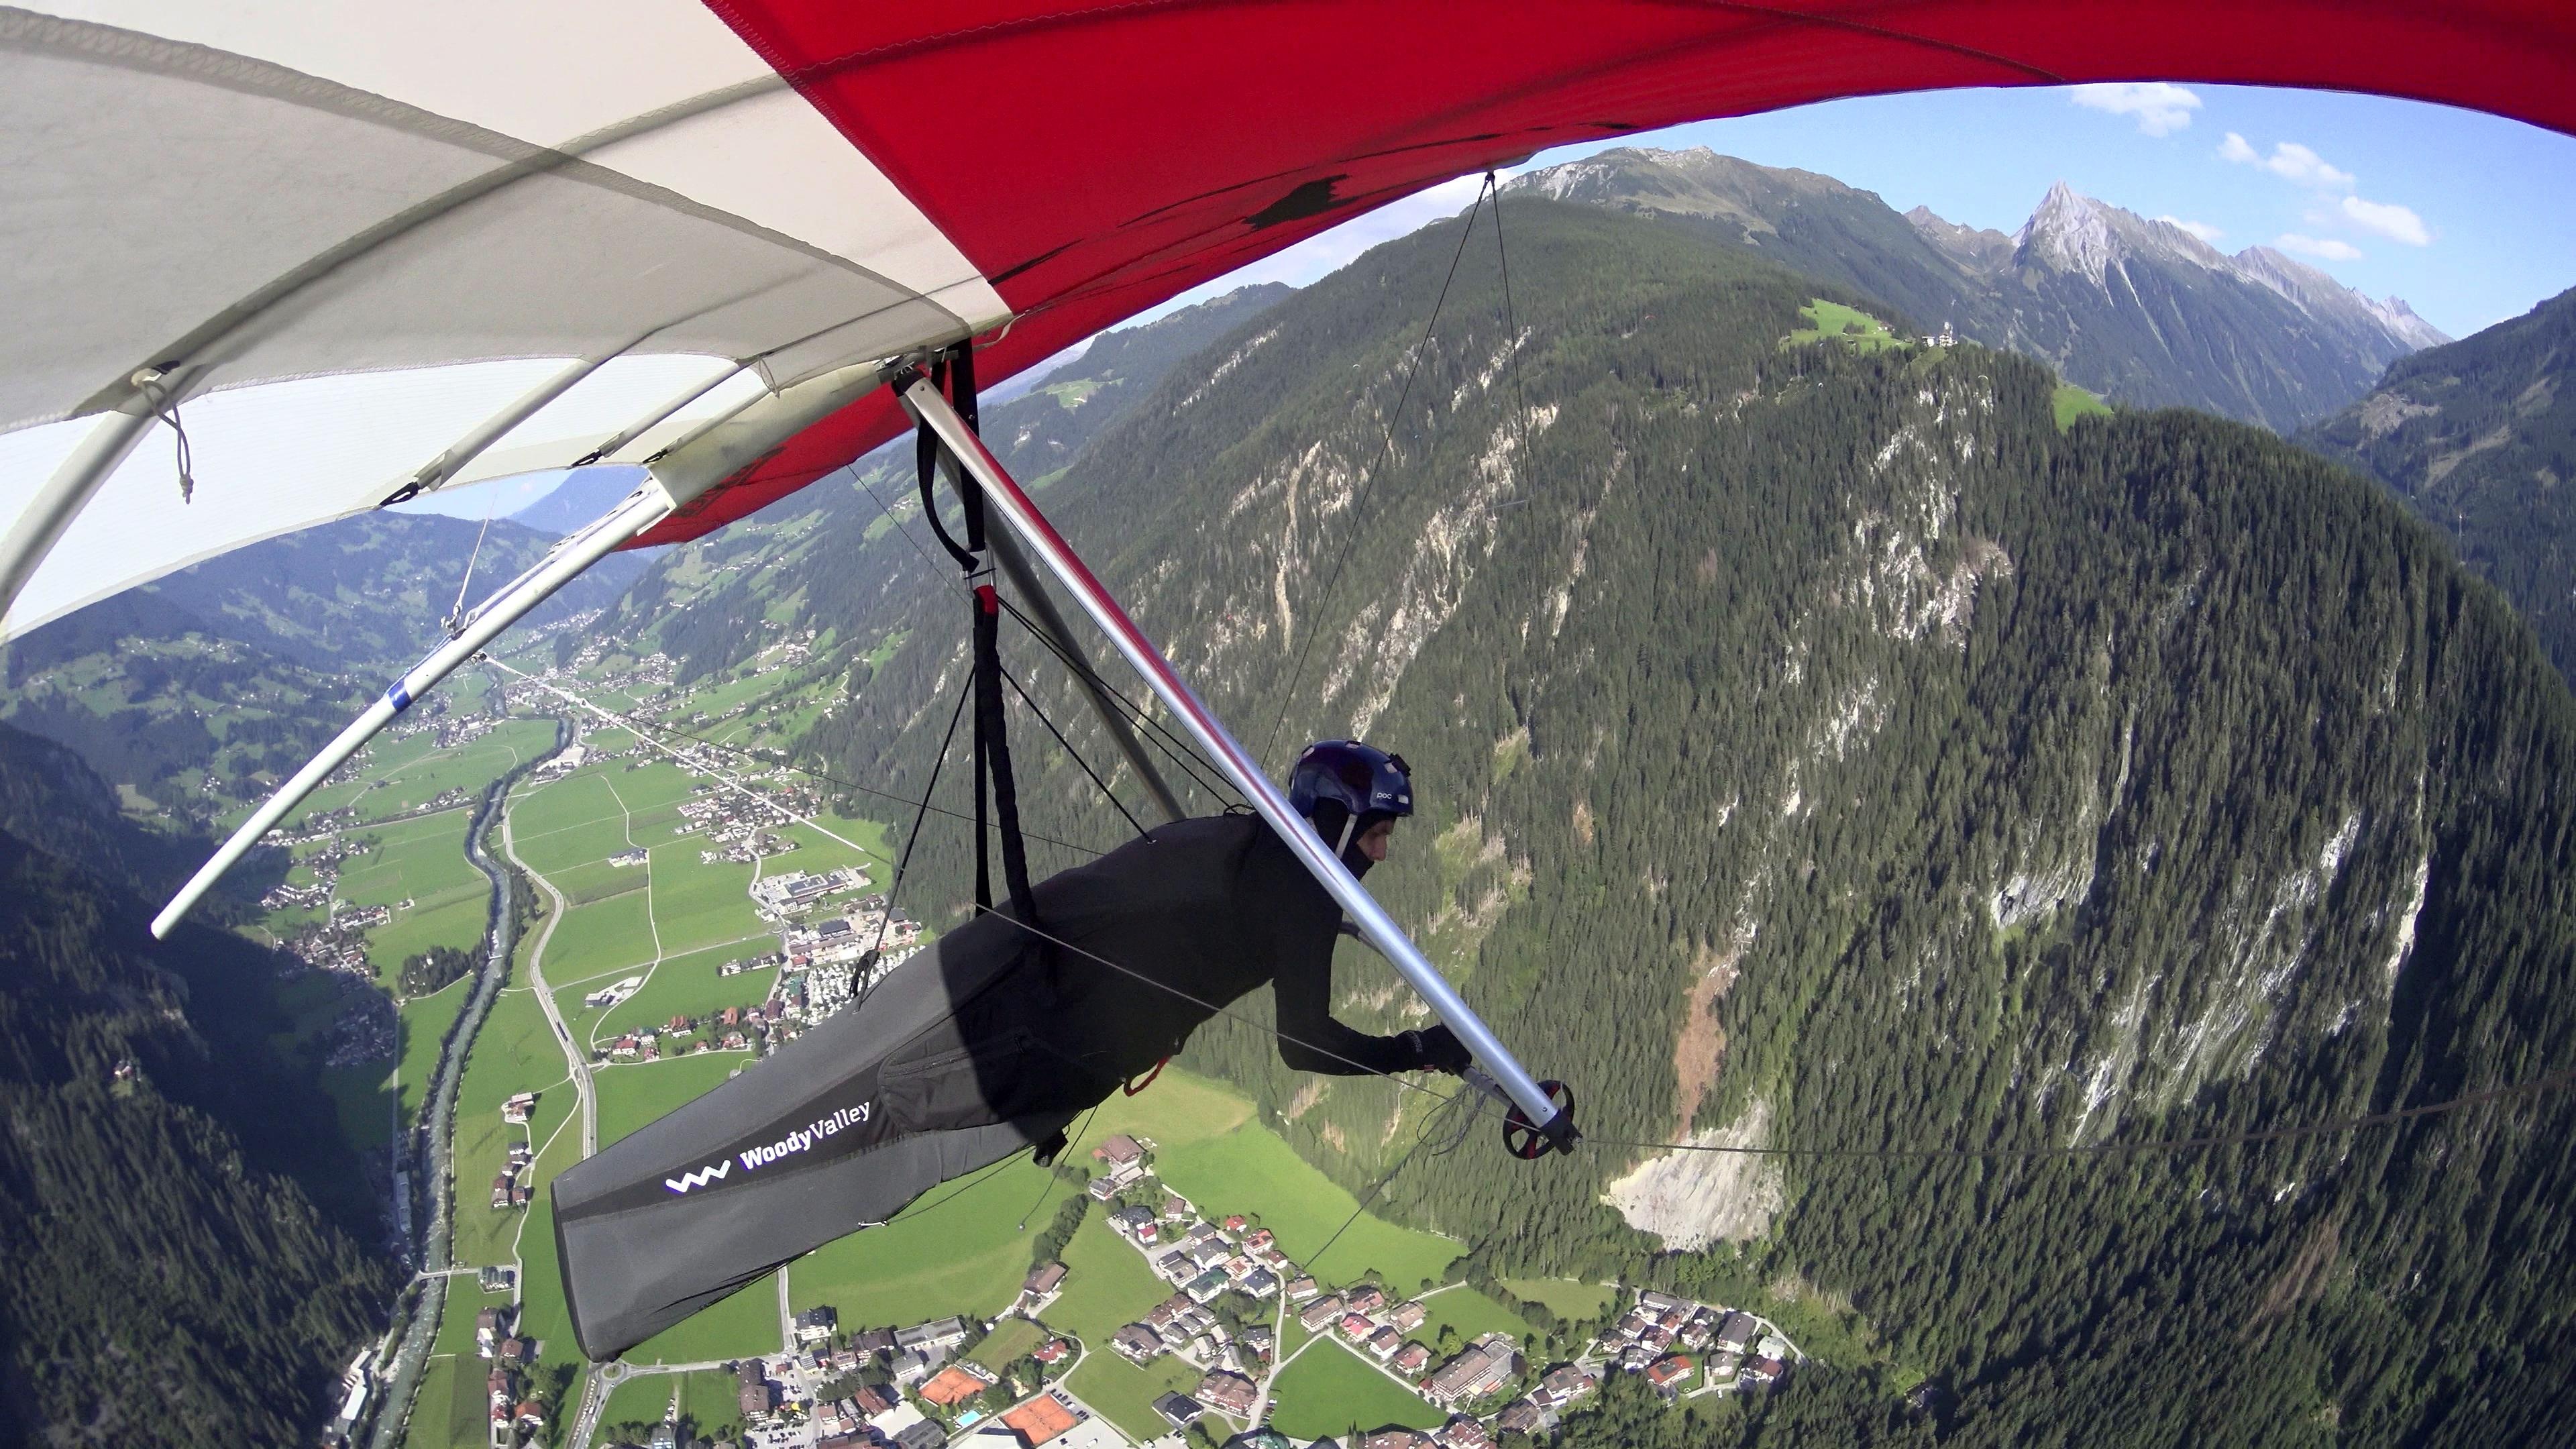 Hang Gliding: Learning to hang glide, New glider, Flying sports, Seedwings Spyder. 3840x2160 4K Wallpaper.